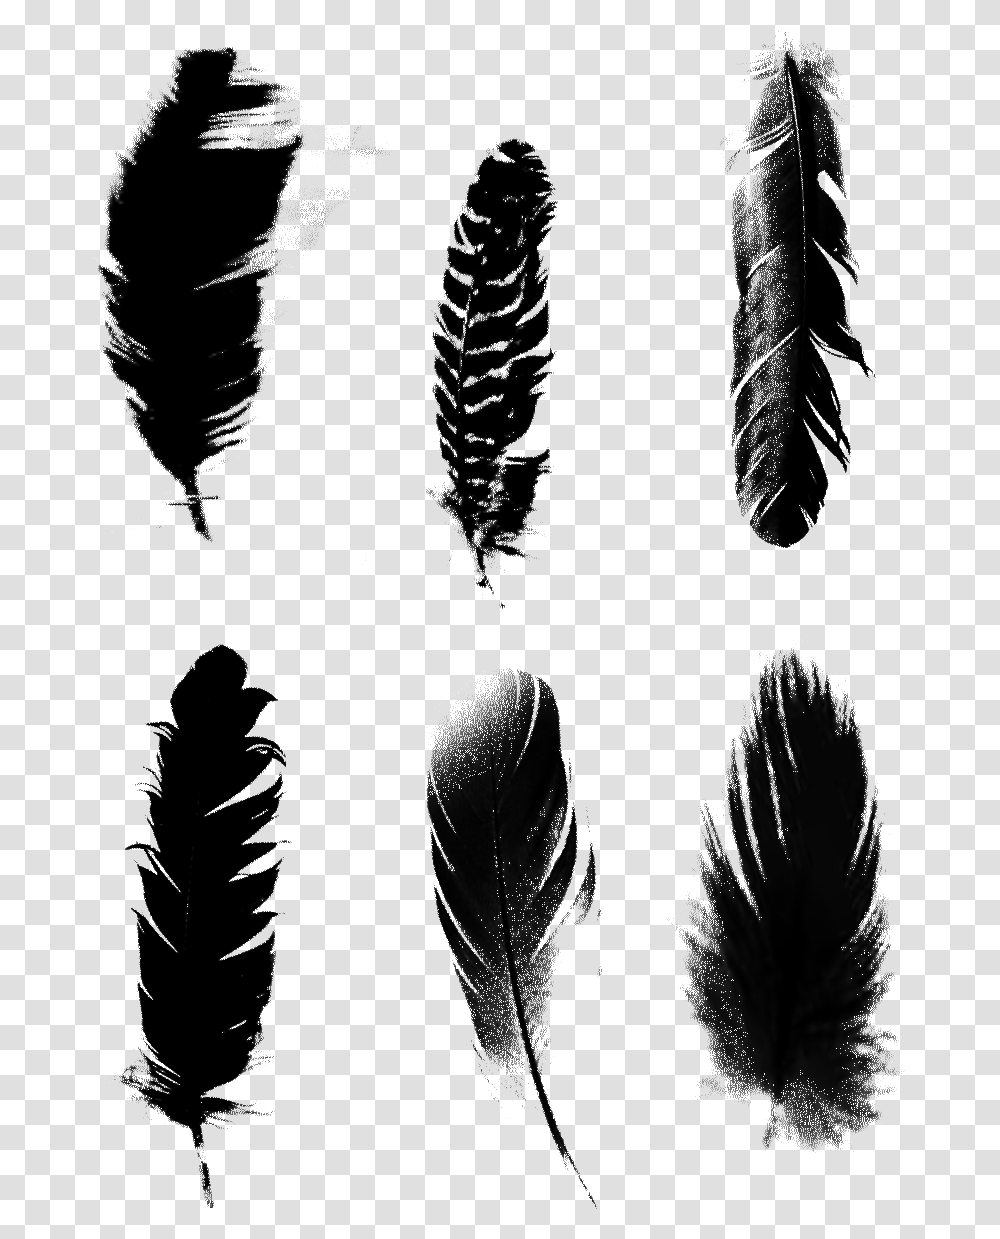 Black Feathers Commercial Minimalist Psd Vector Feather, Leaf, Plant, Silhouette, Person Transparent Png